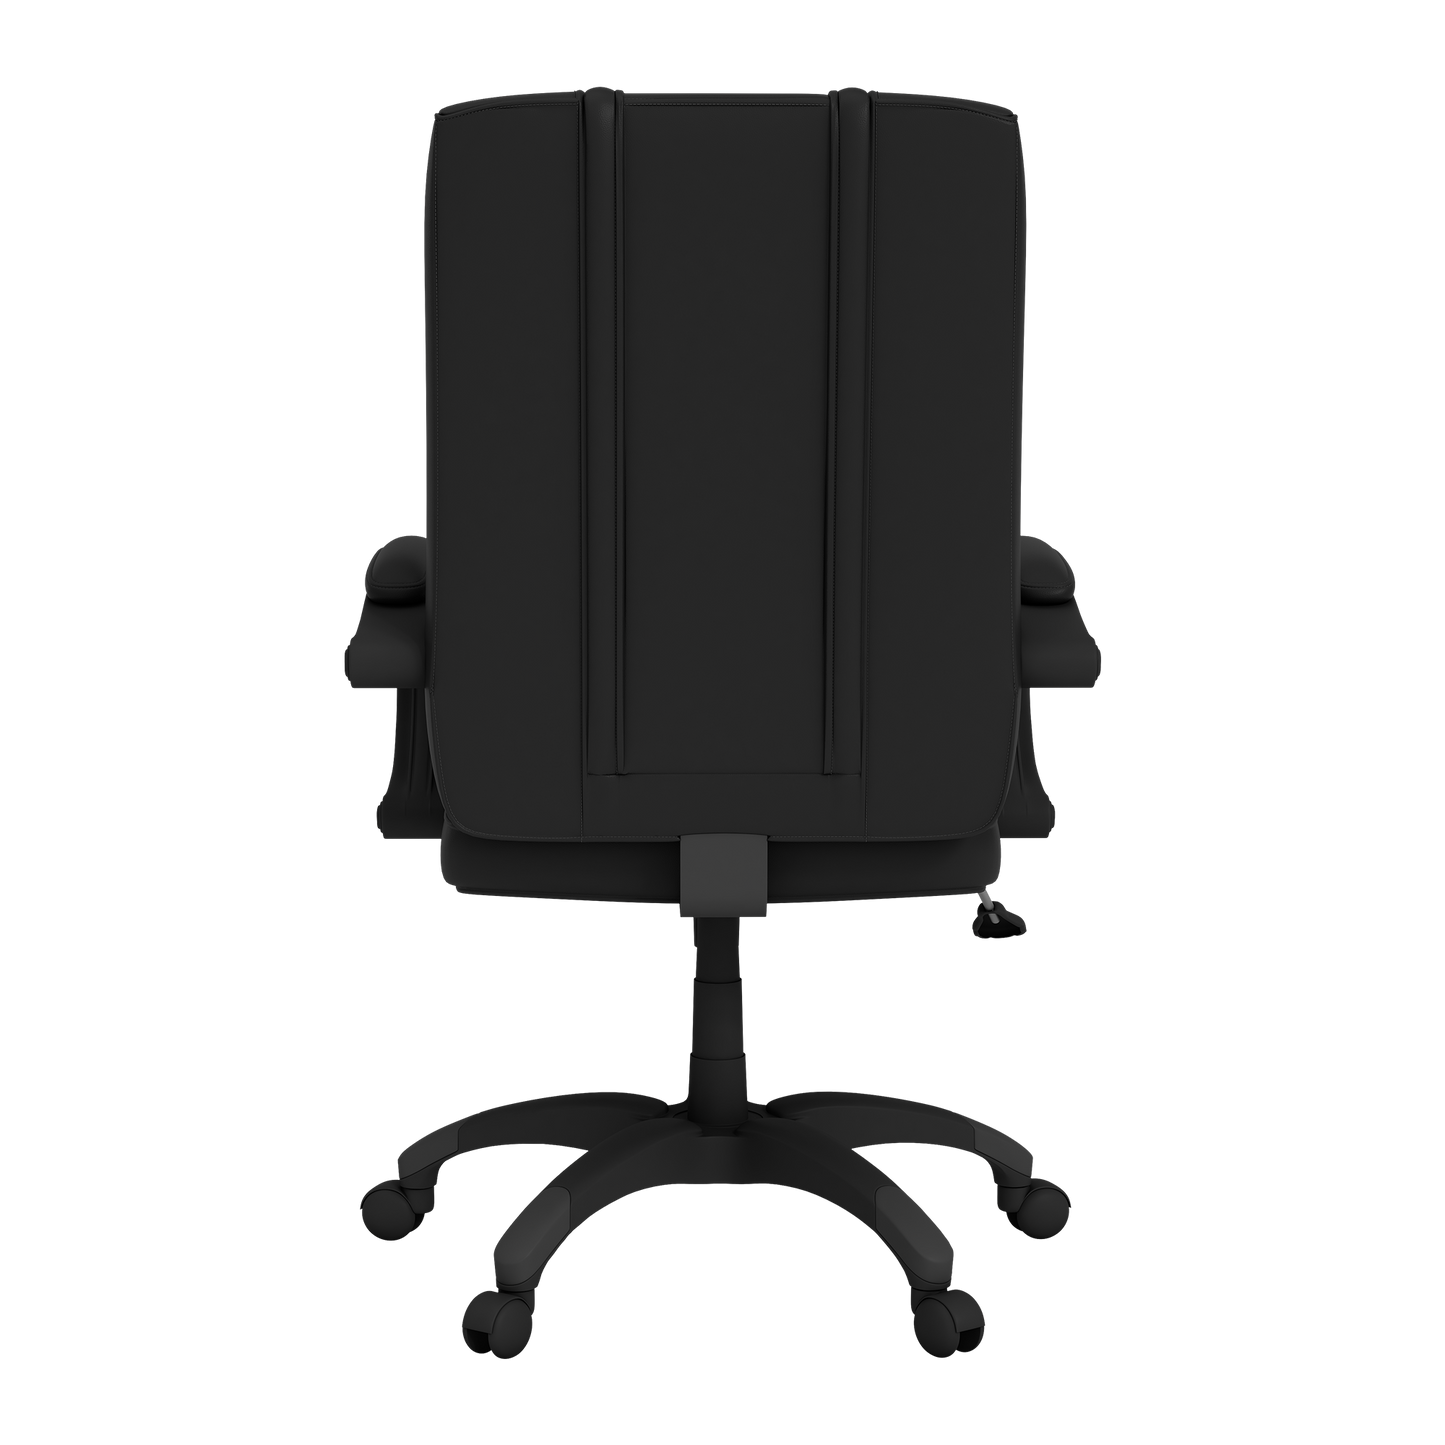 Office Chair 1000 with Kingpins Wordmark Logo